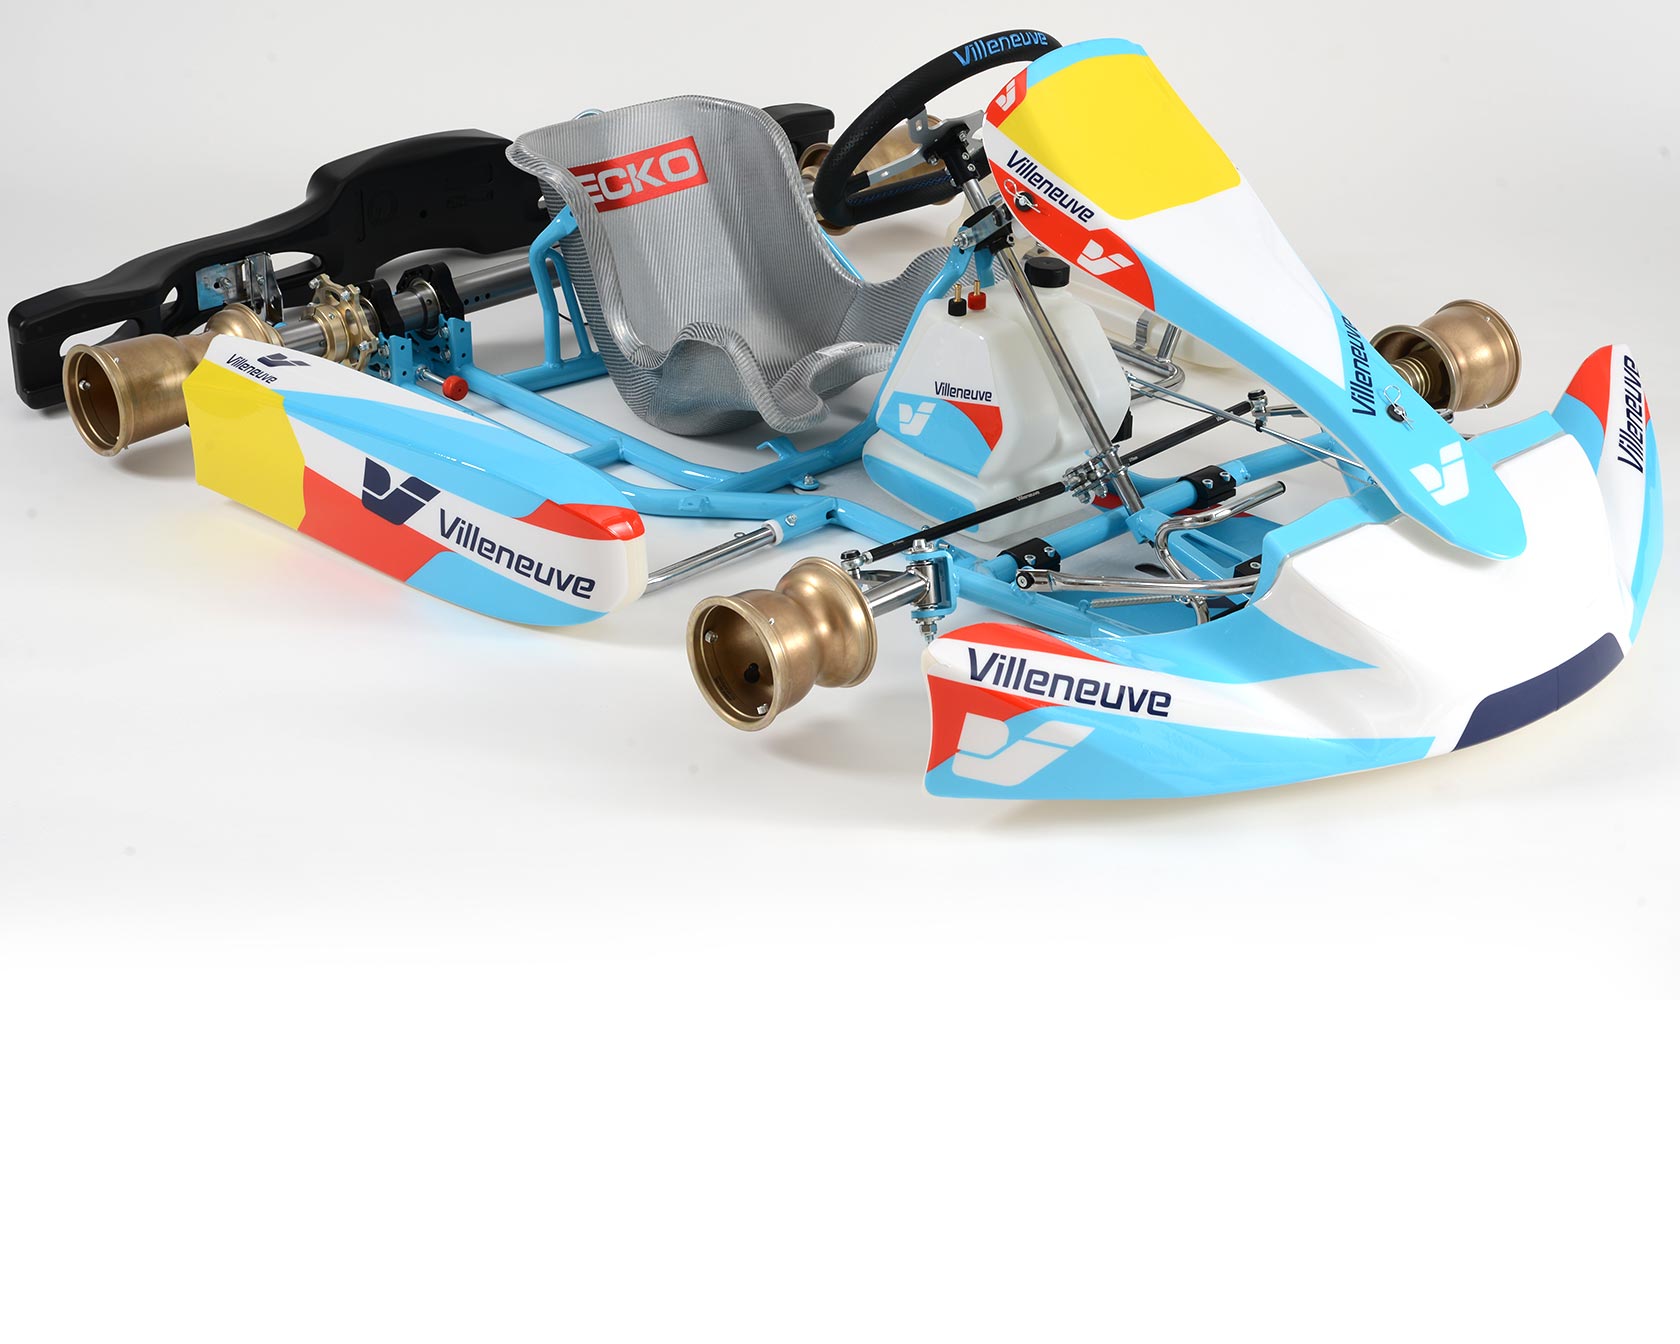 OKR and KZR. The new brake systems by the Slovakian company K-Kart